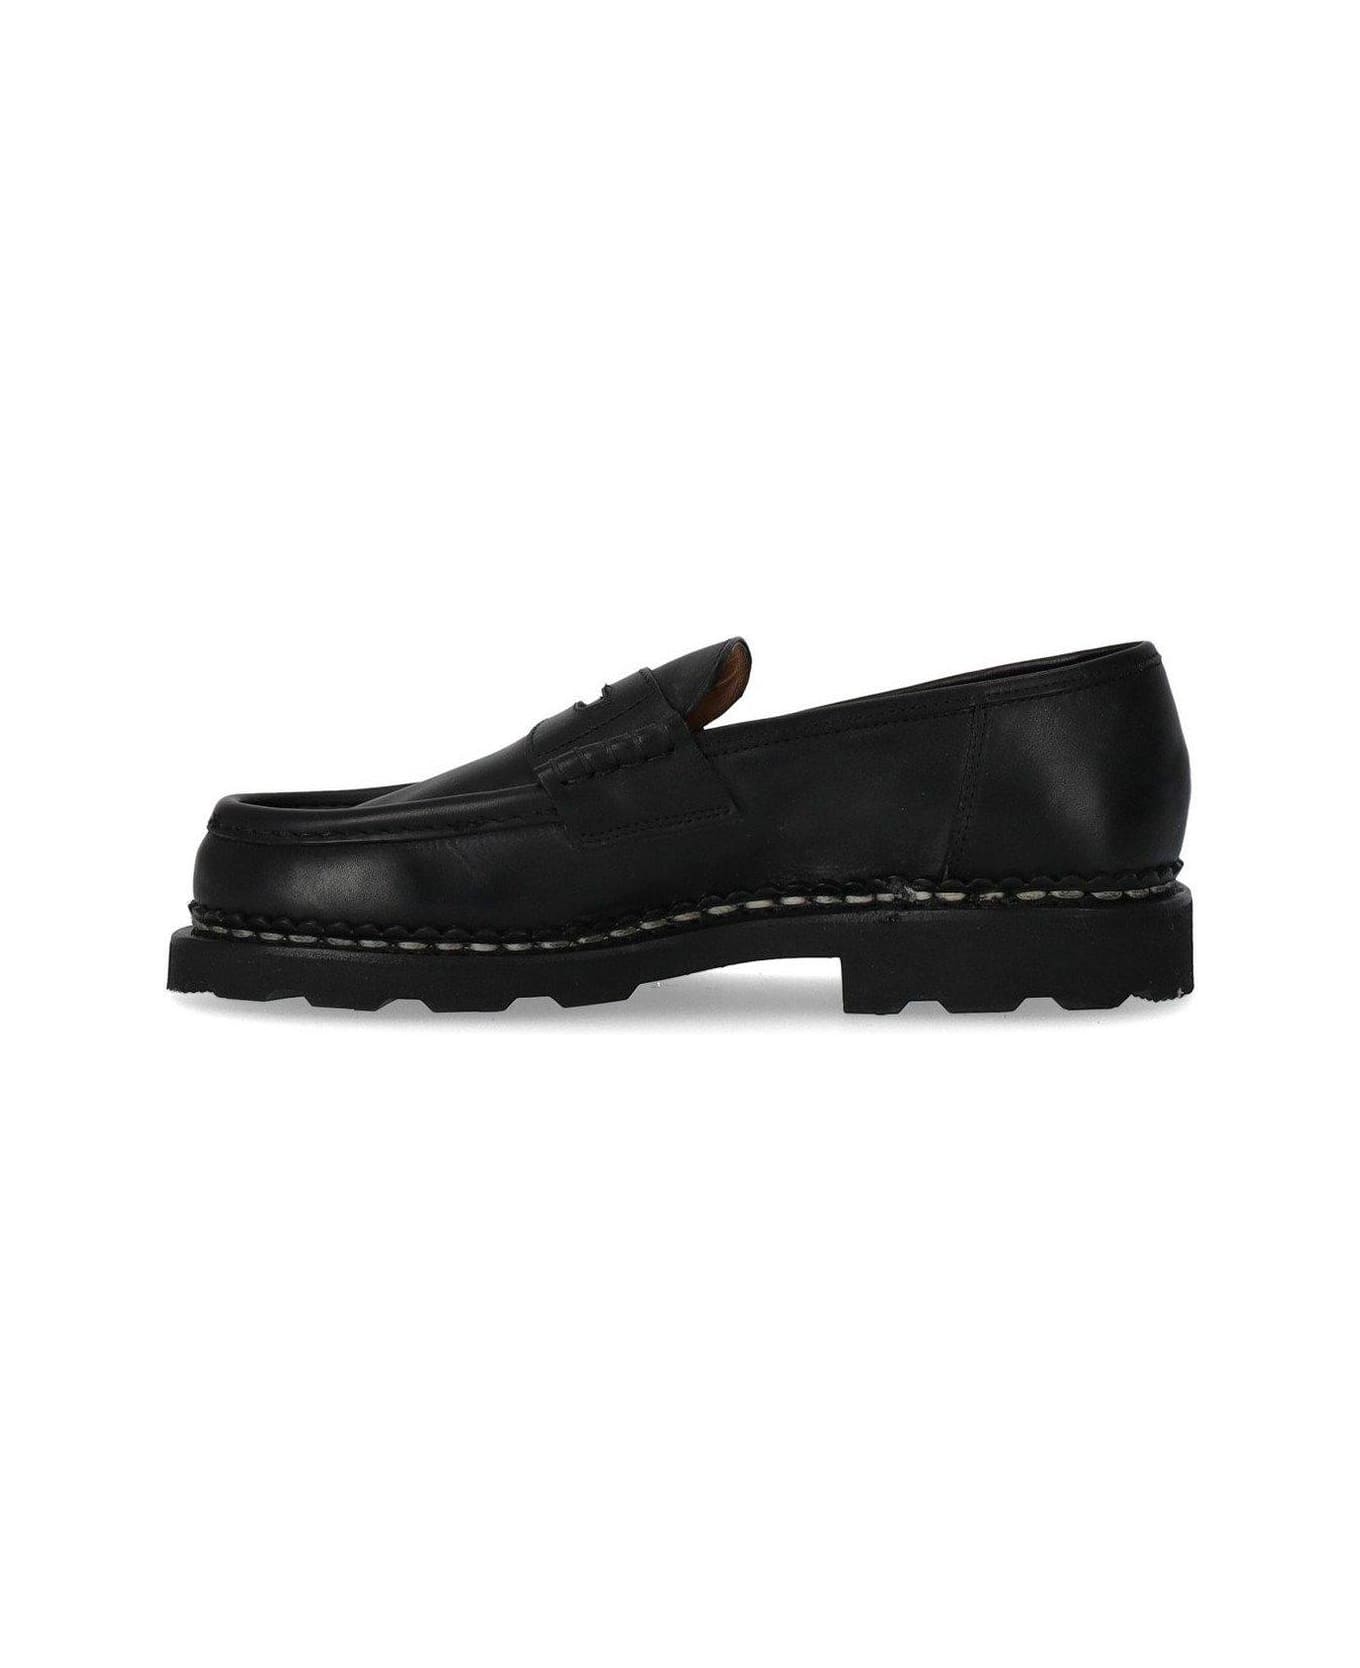 Paraboot Reims Marche Slip-on Loafers - Nero